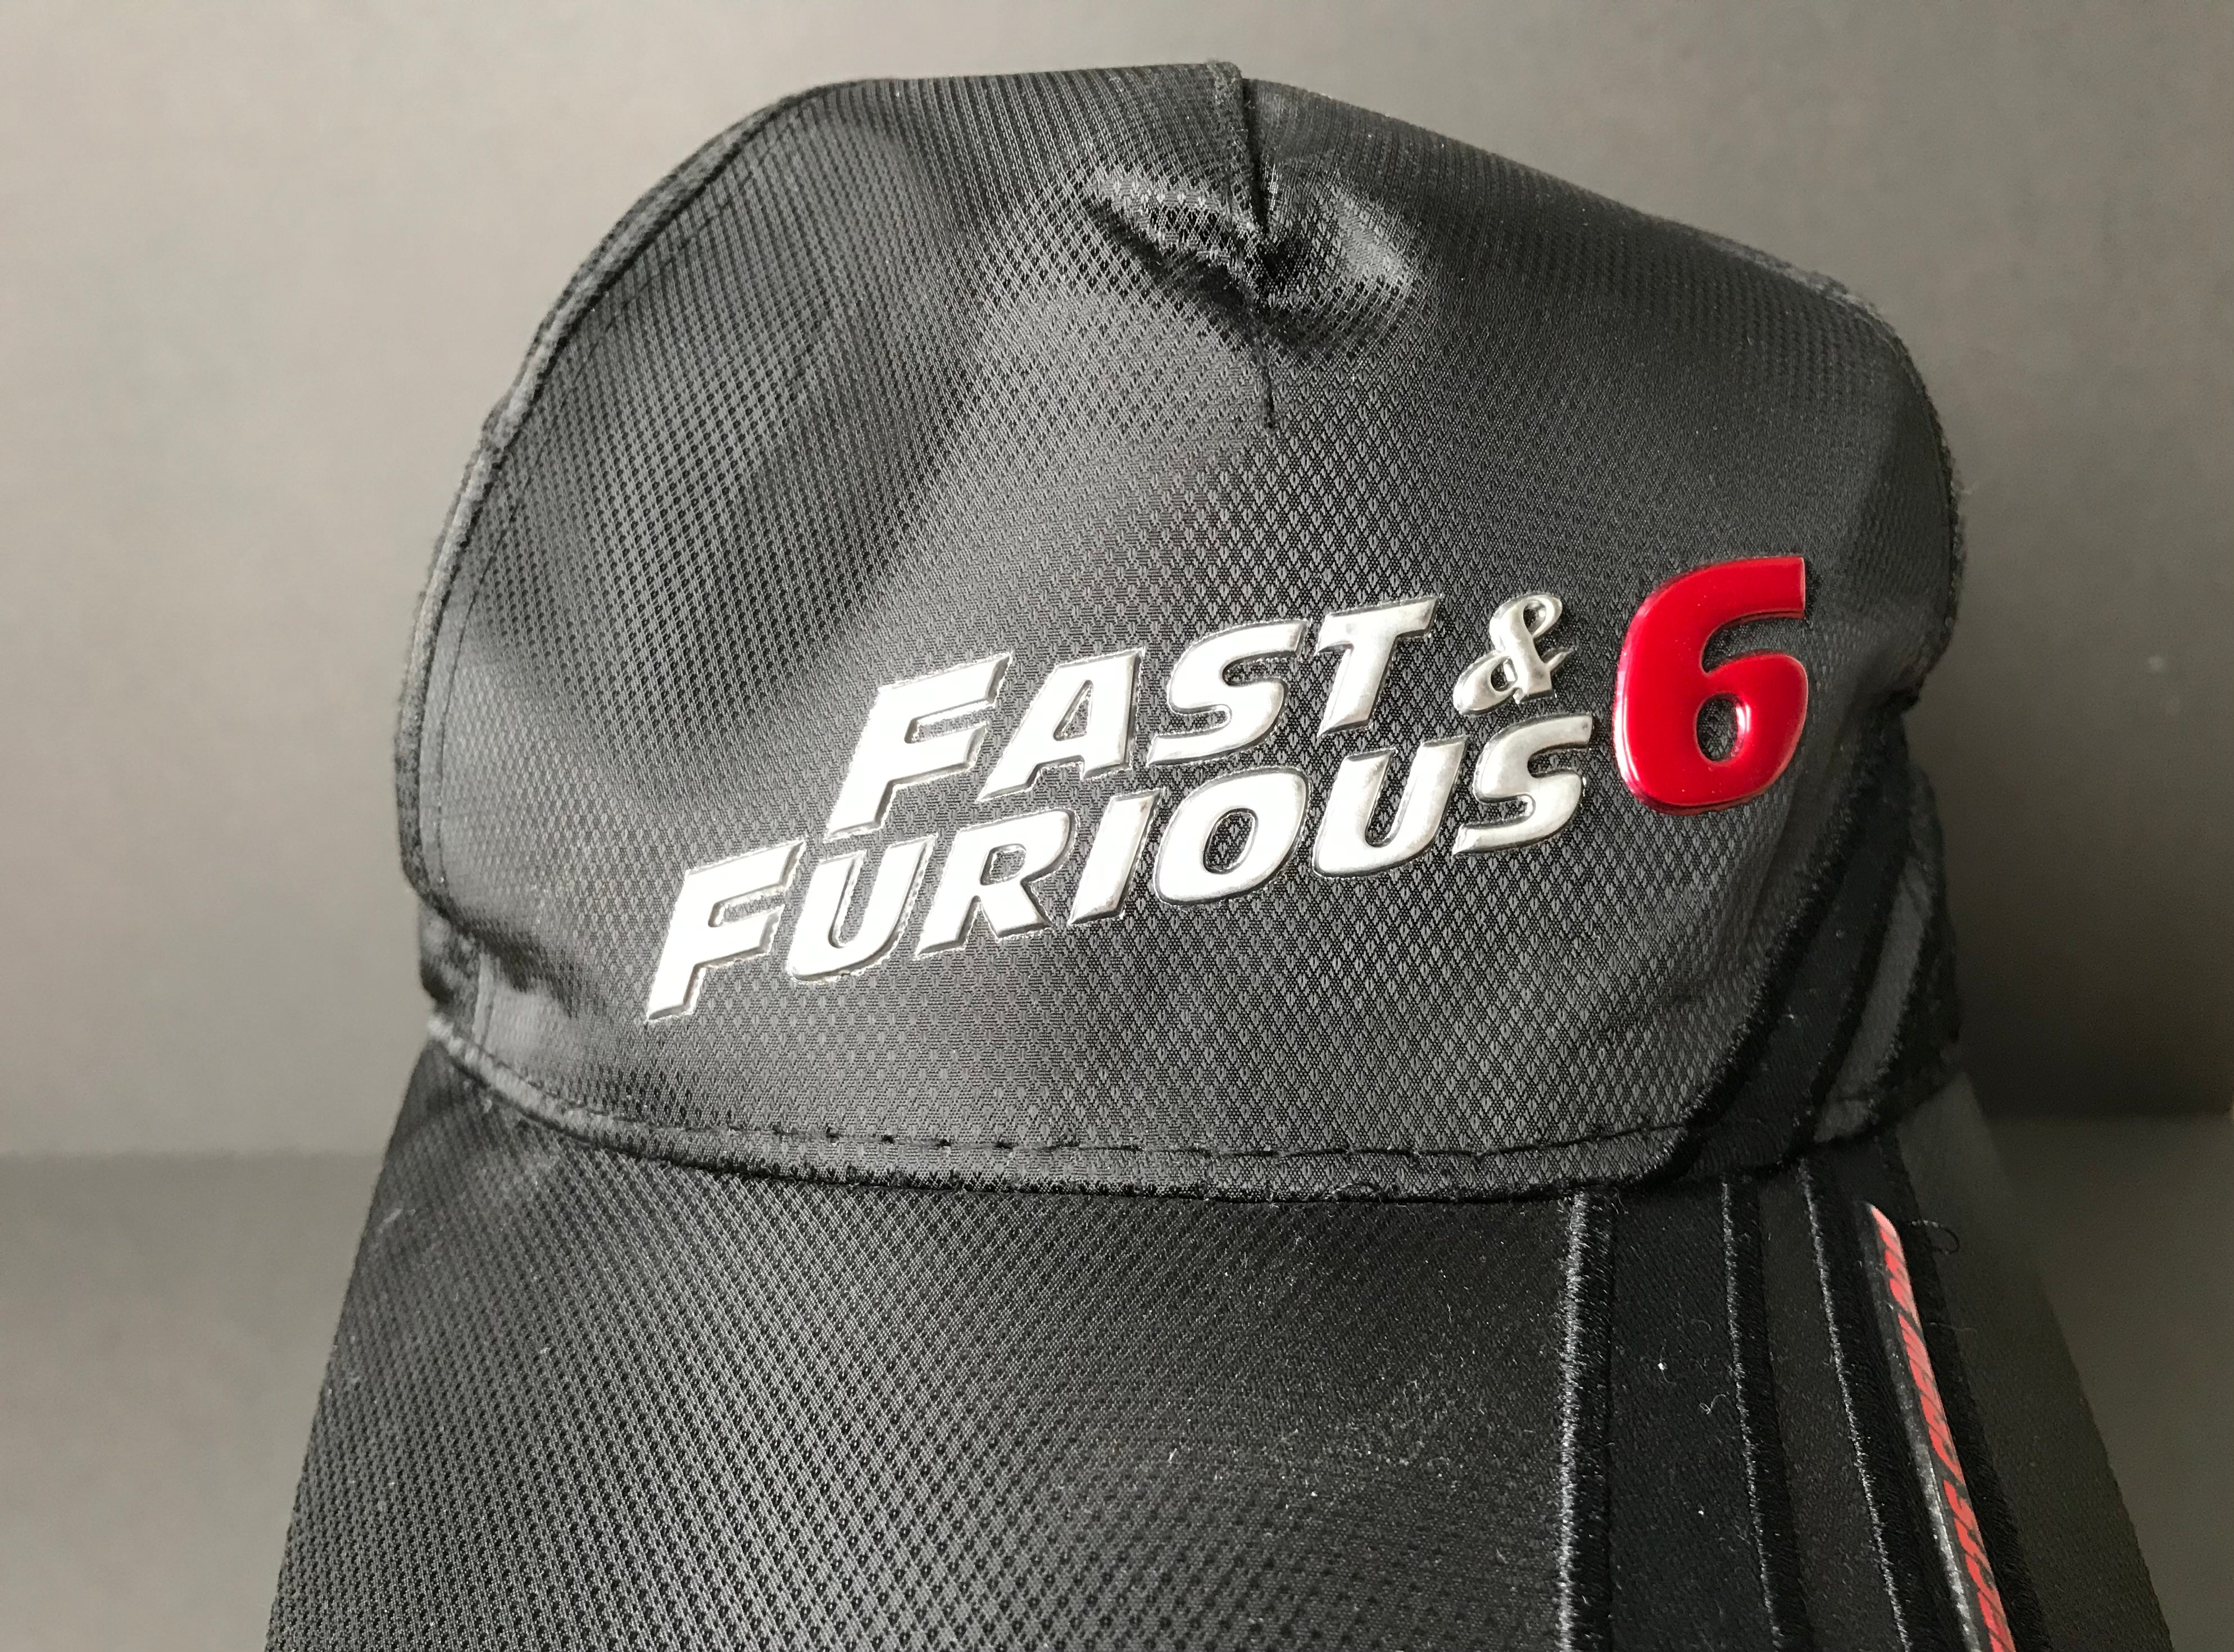 Fast & Furious 6 (2013) - A Rare Special Effects Crew Cap